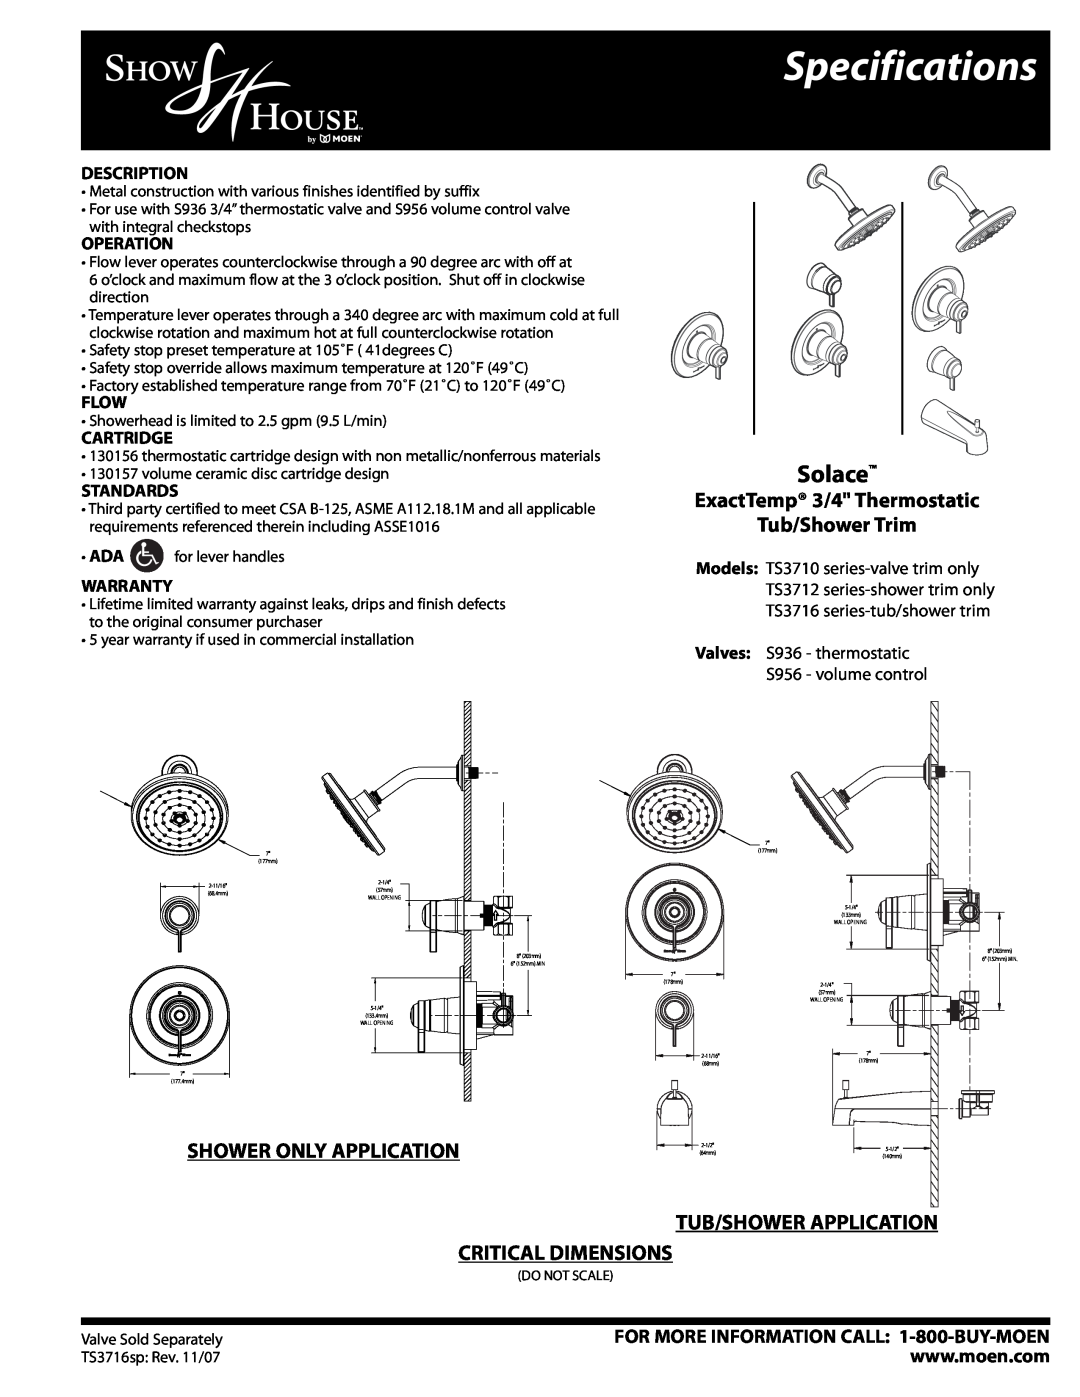 Moen TS3712 specifications Specifications, Solace, ExactTemp 3/4 Thermostatic Tub/Shower Trim, Shower Only Application 